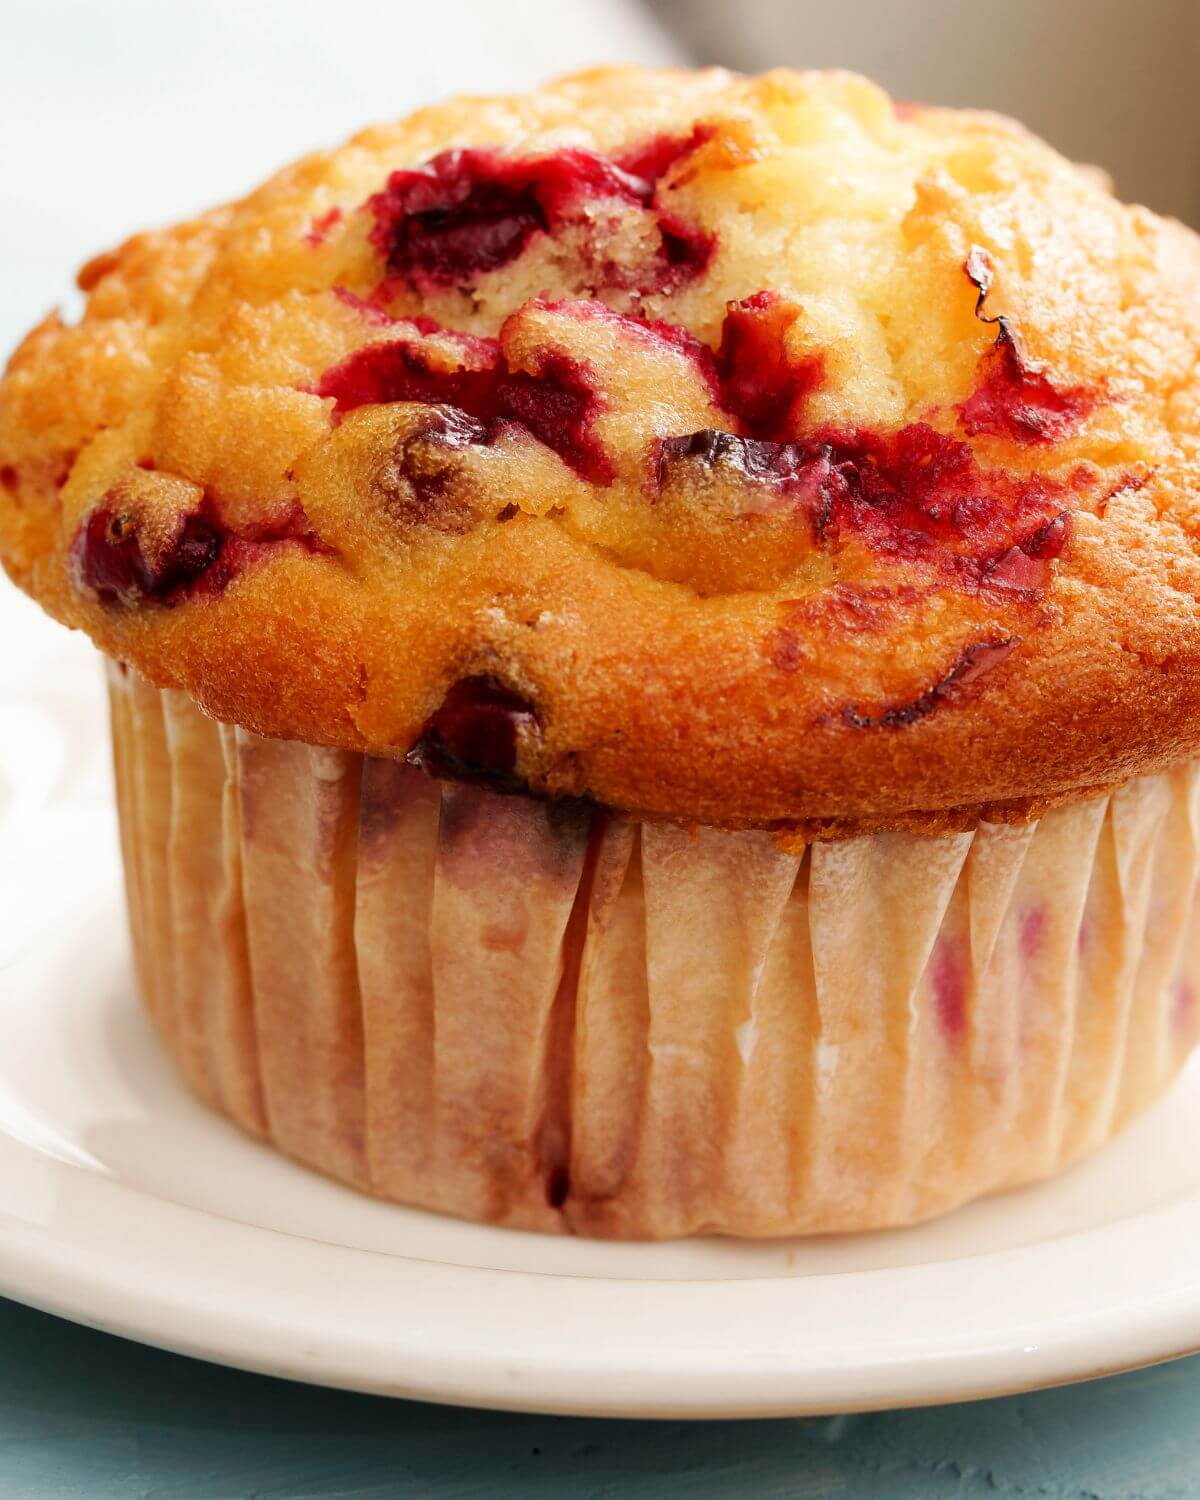 Close up on the Muffin.